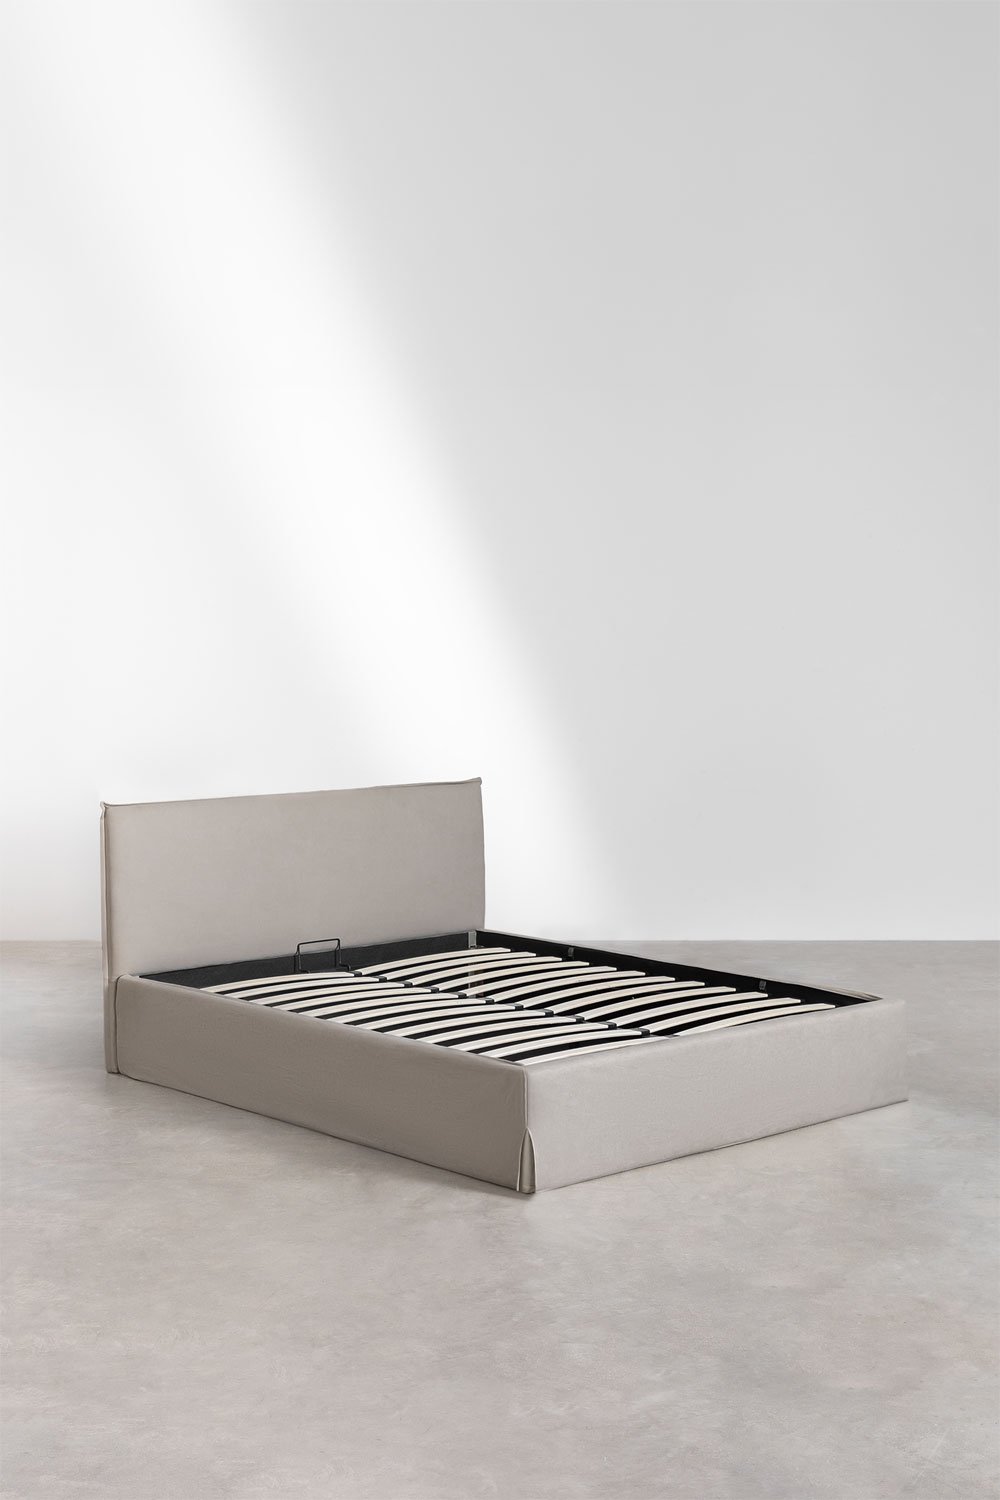 Lorea bed with foldable canape, gallery image 1